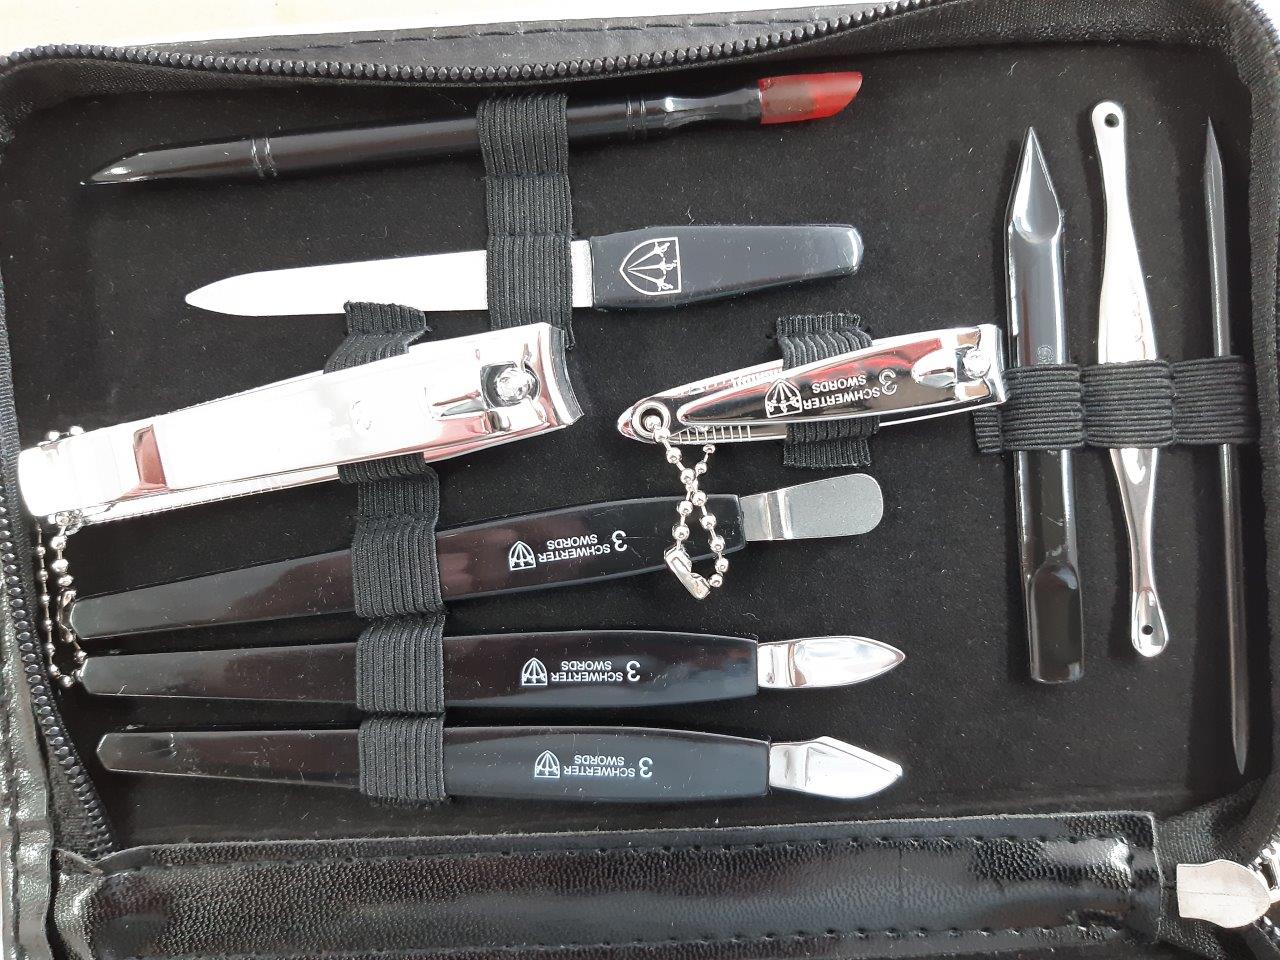 3 Swords Manicure Set: 16 Handmade Steel Nail Tools in a Black Leather Look Case 9210 PN